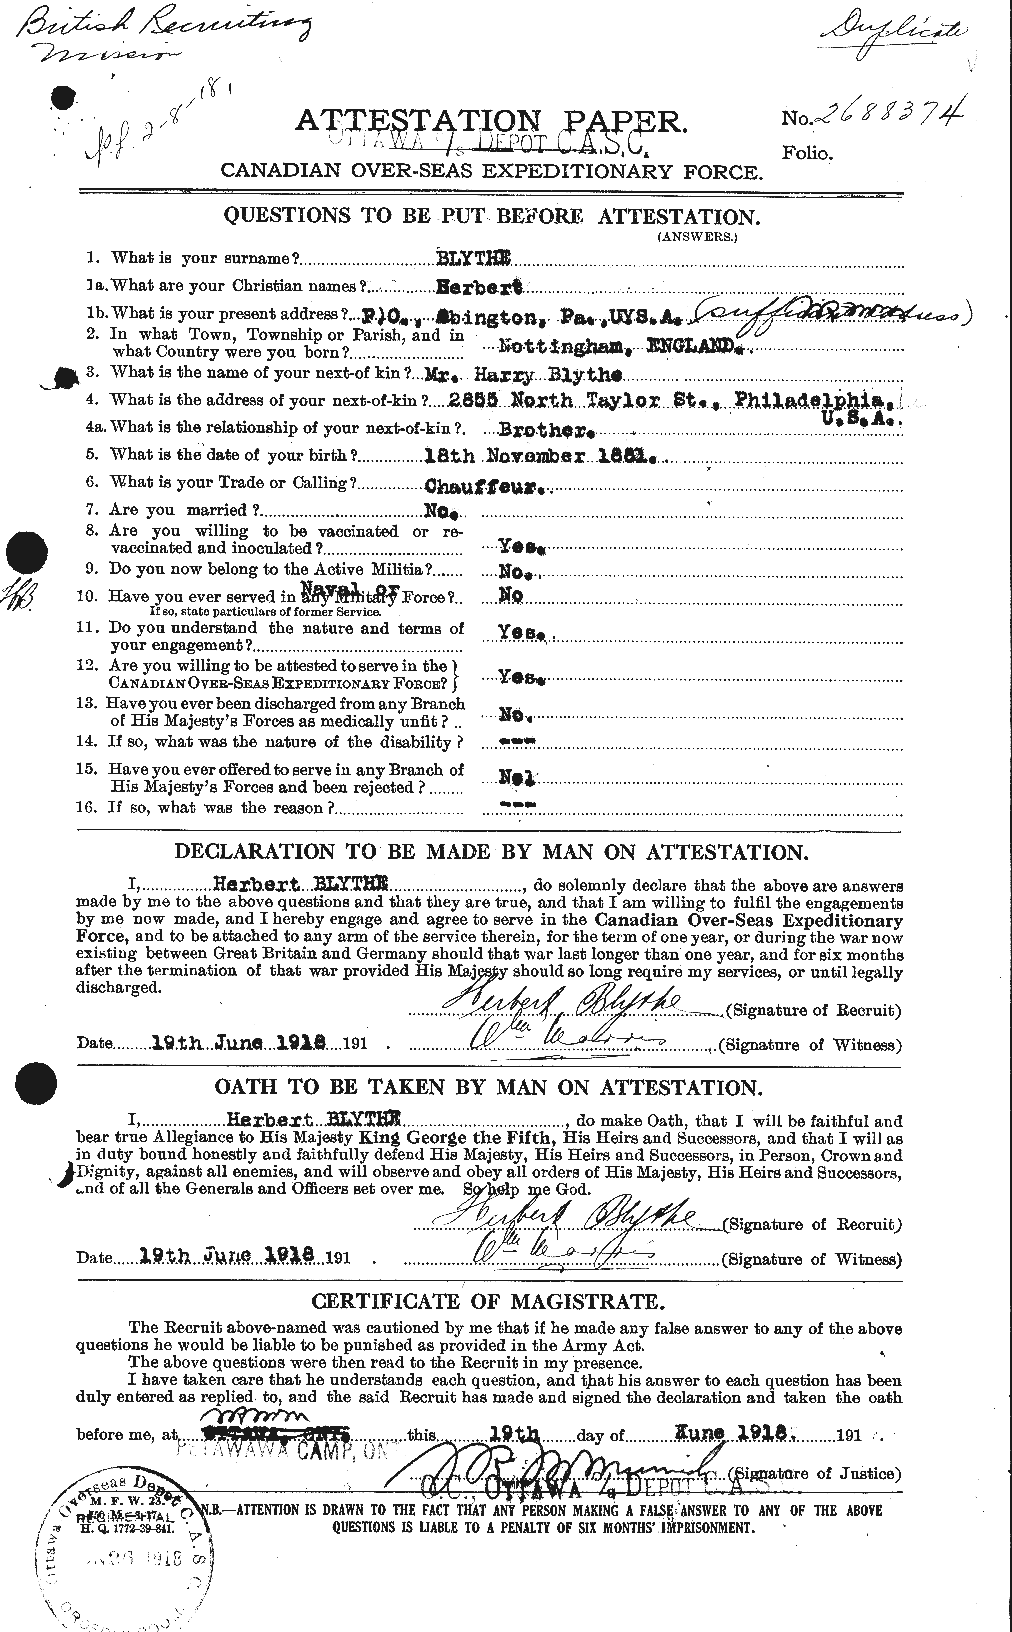 Personnel Records of the First World War - CEF 249157a